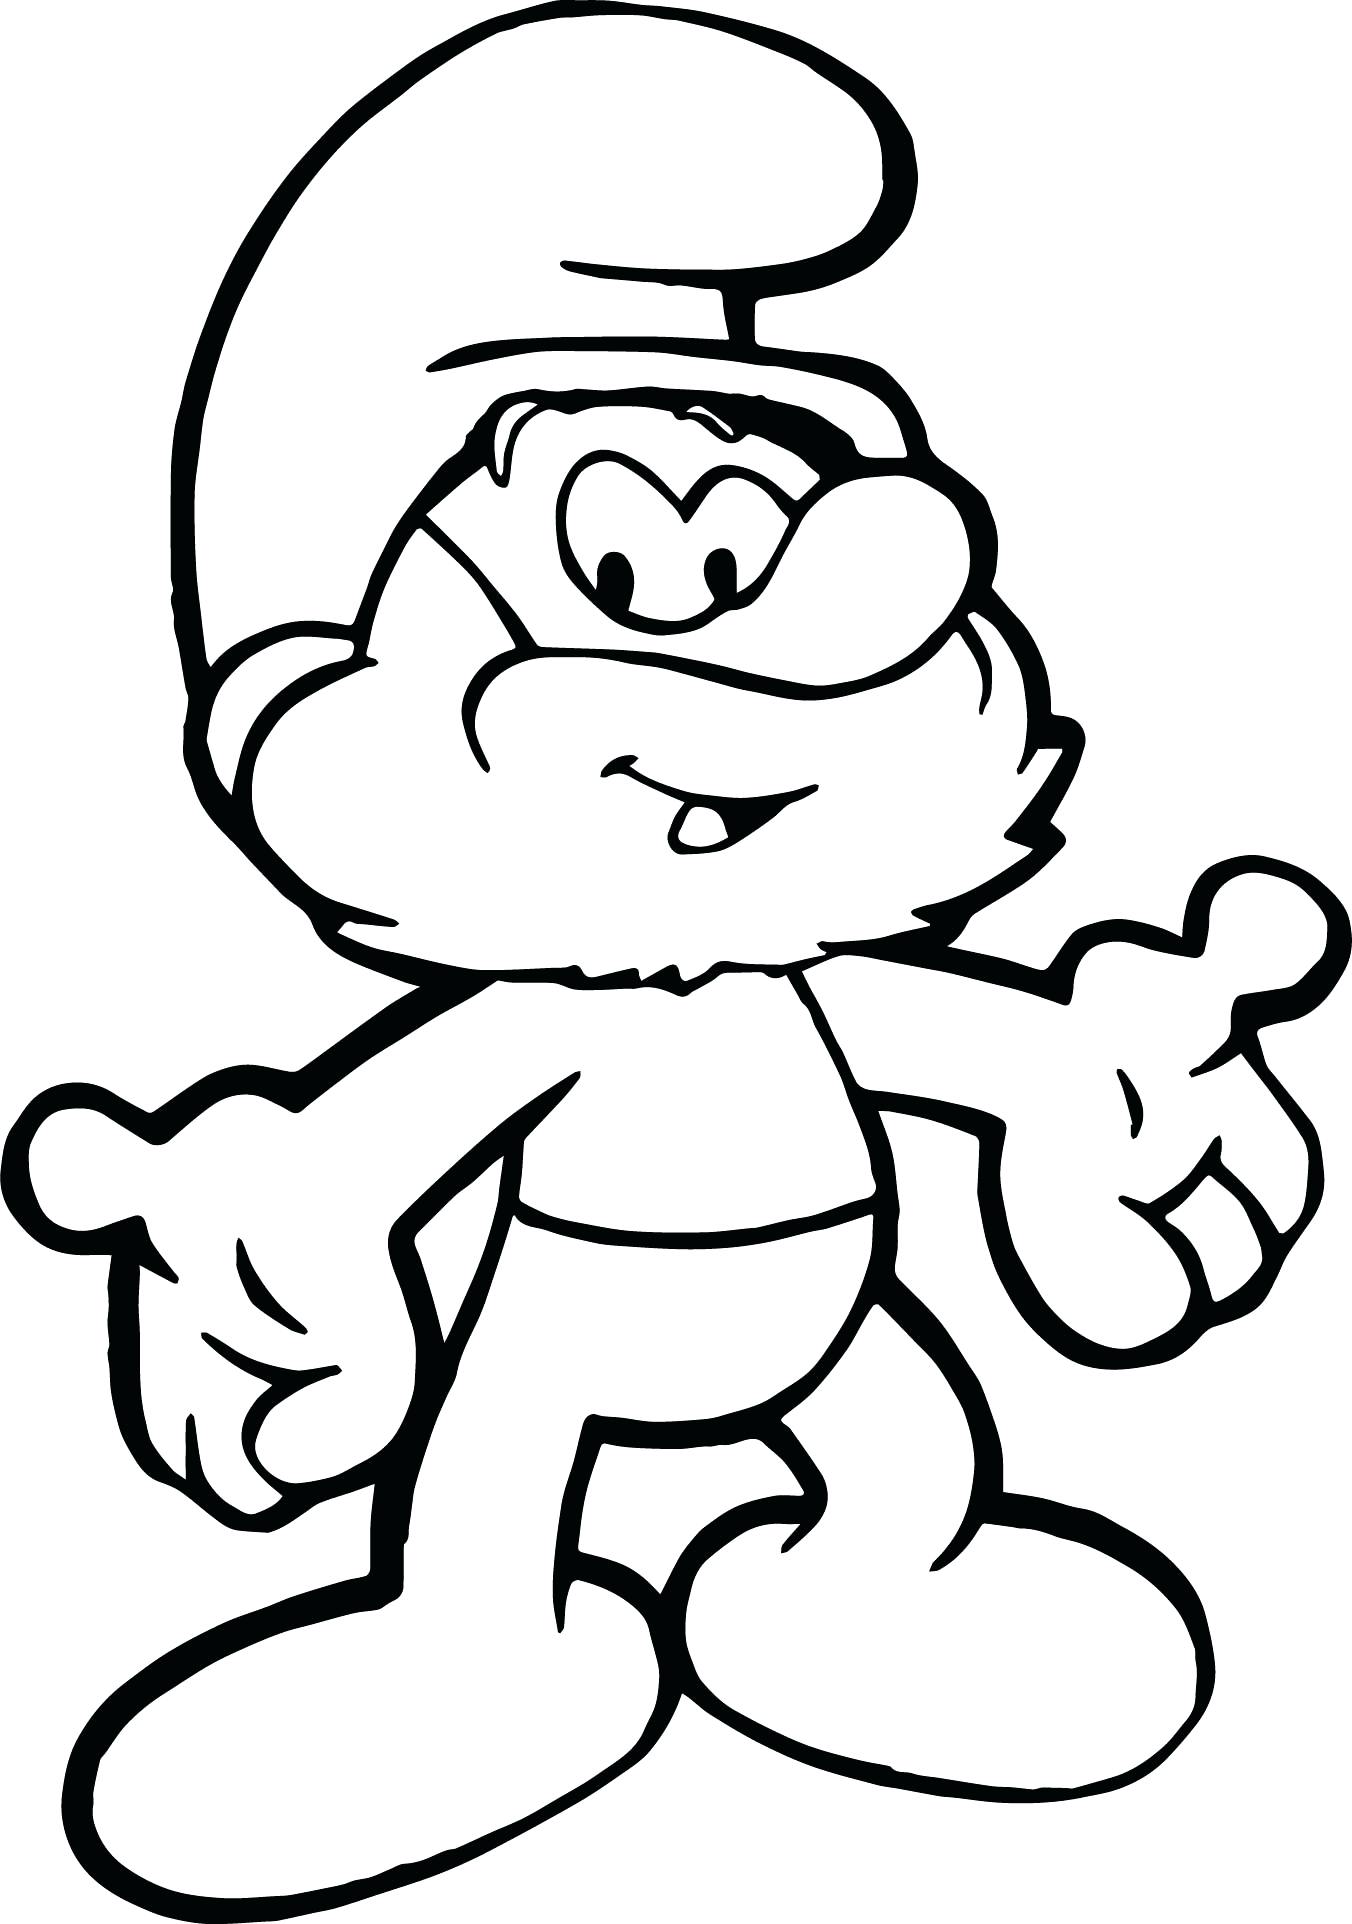 smurfs-coloring-pages-at-getdrawings-free-download